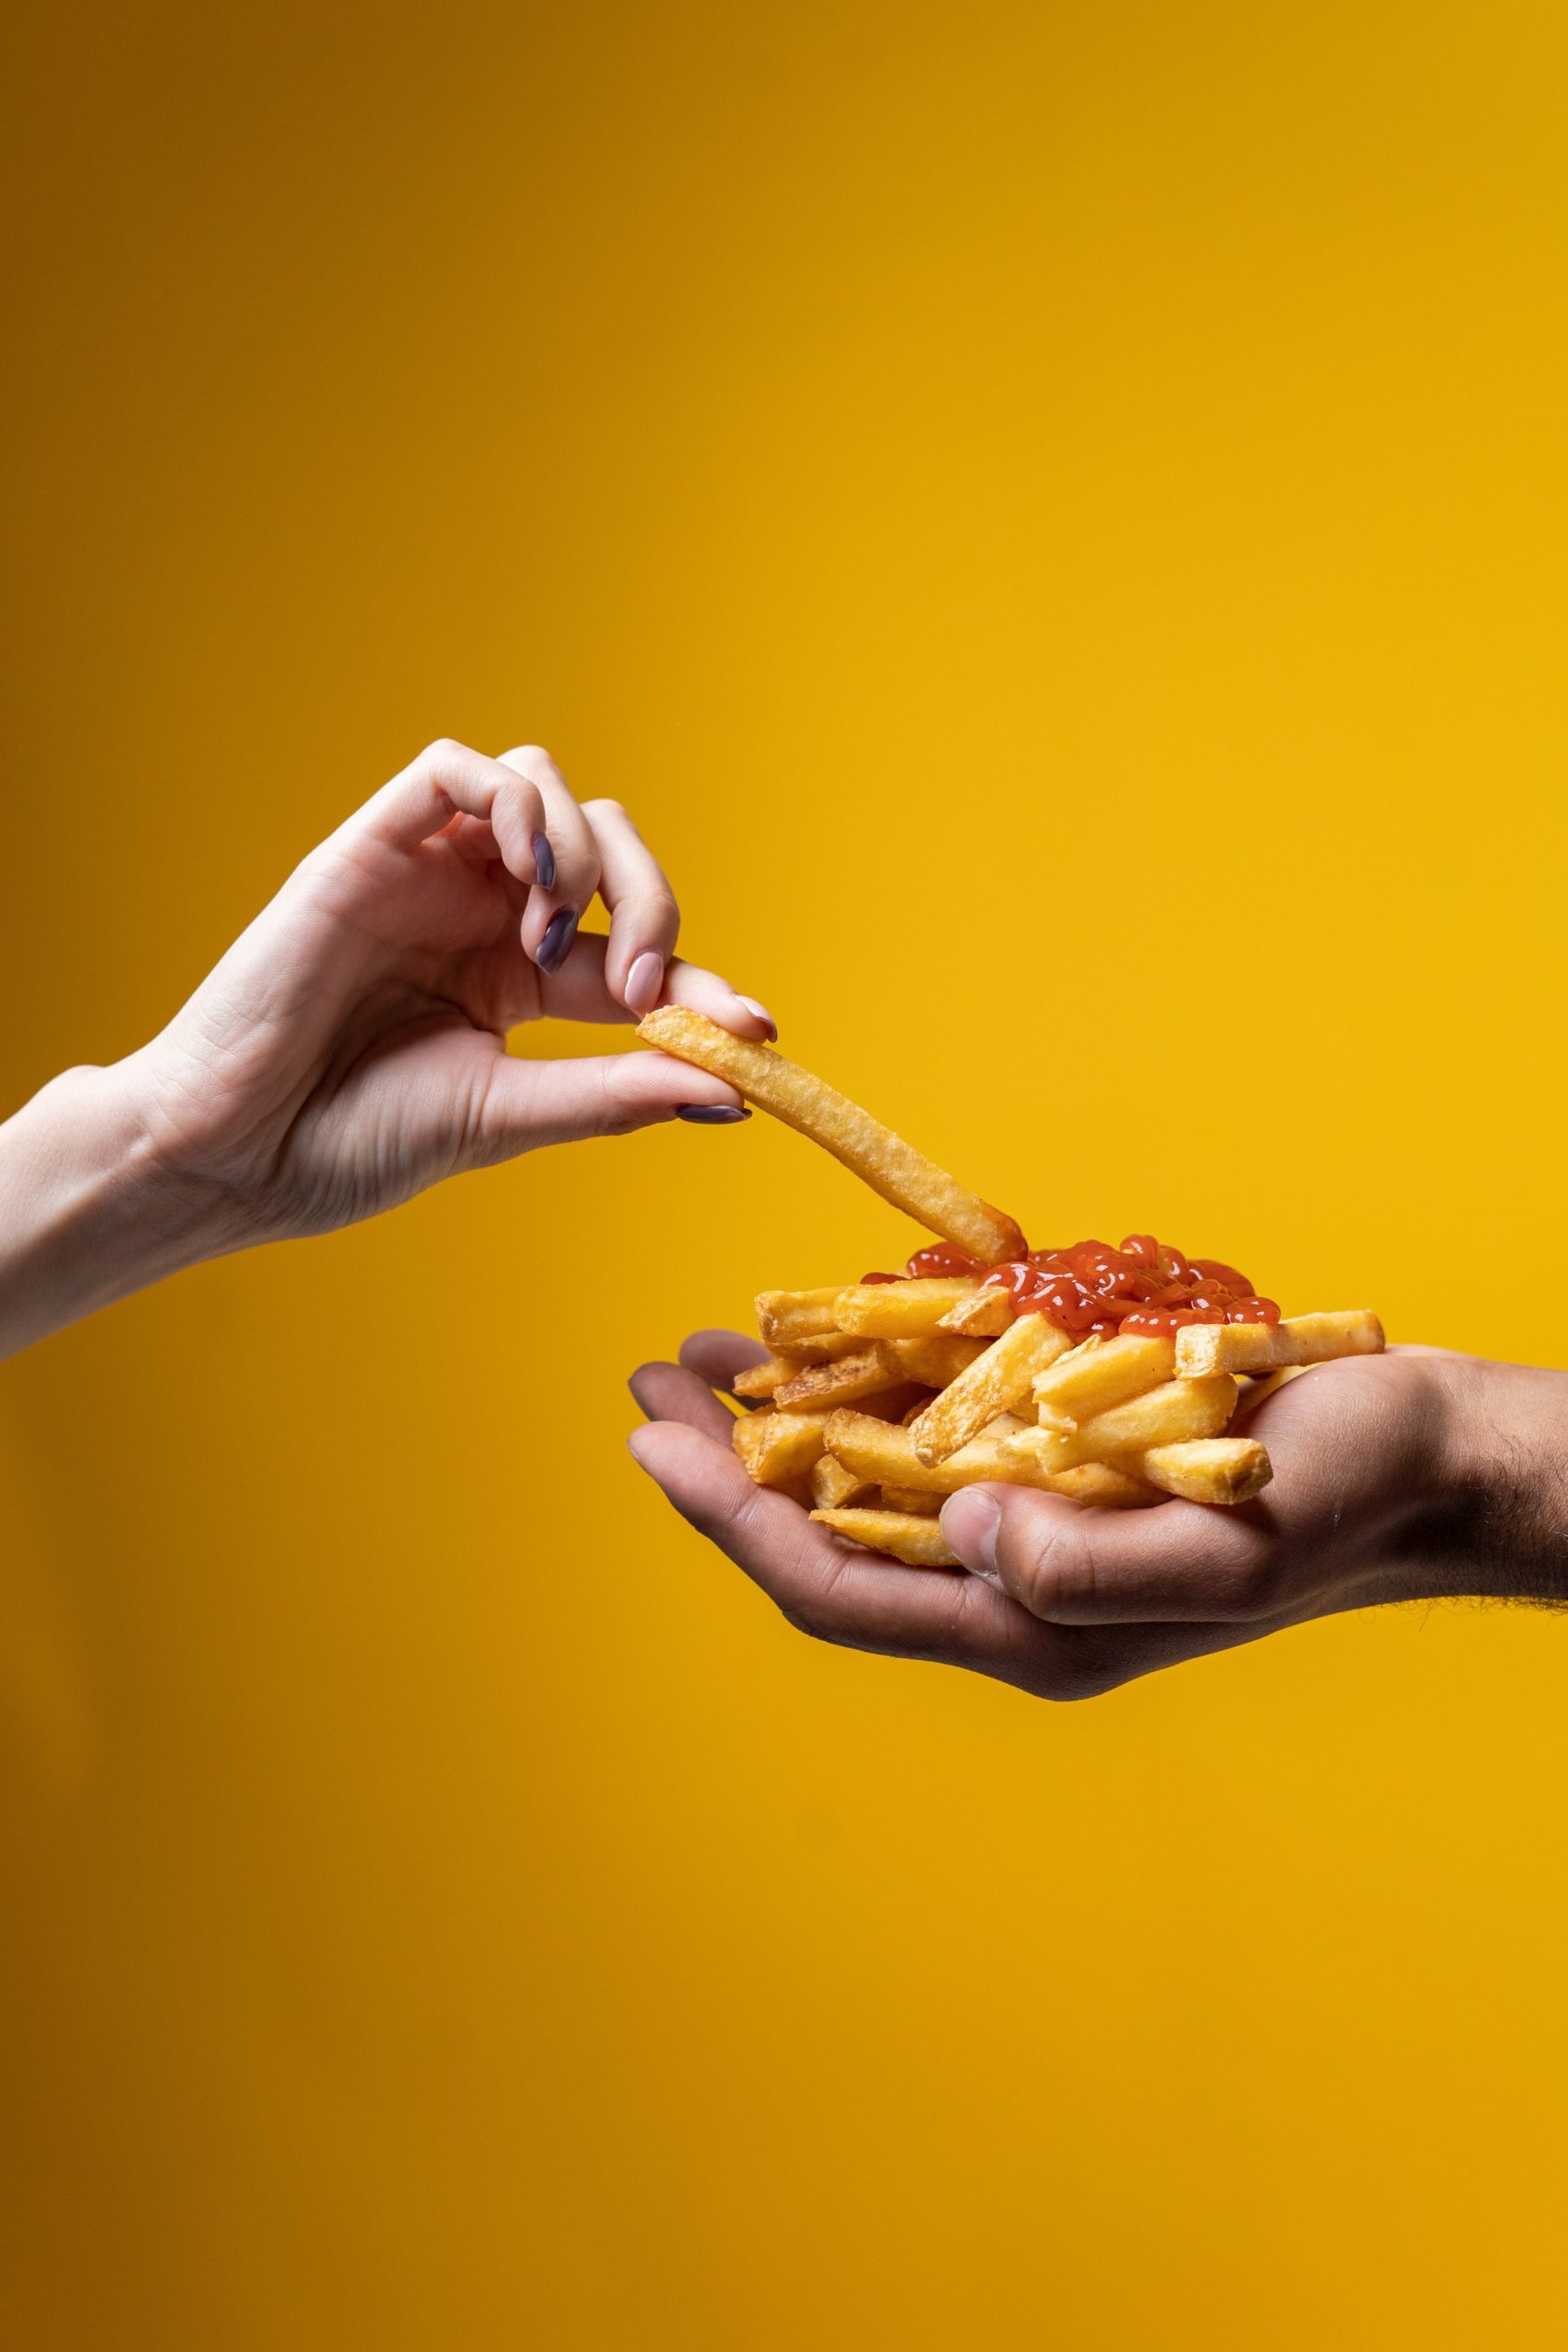 Share Your Fries, Change the World, and Save a Life: Get Generous with Your Money